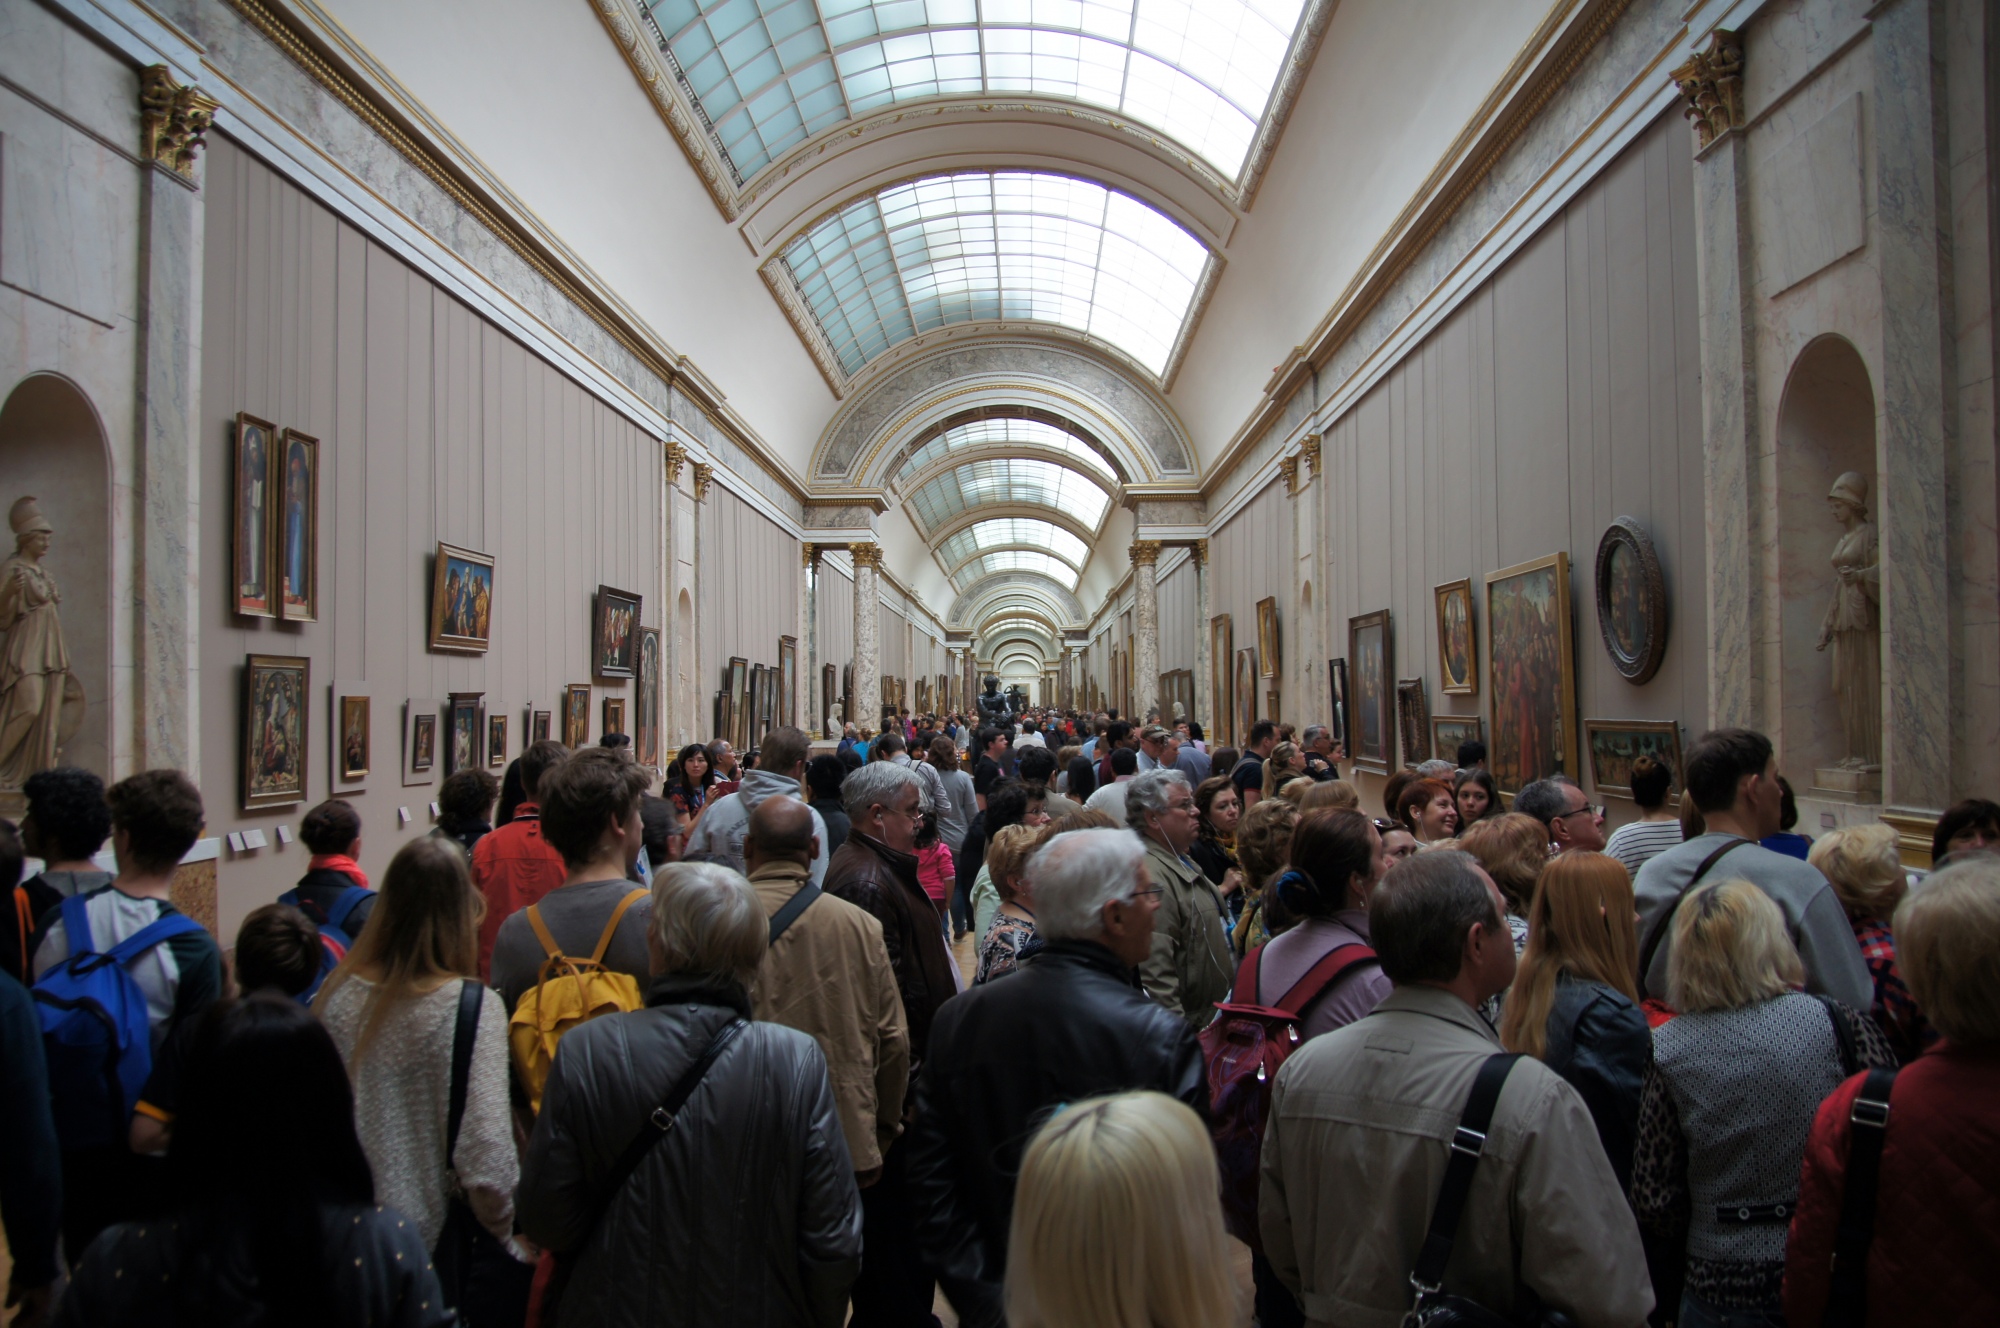 Crowds of The Louvre